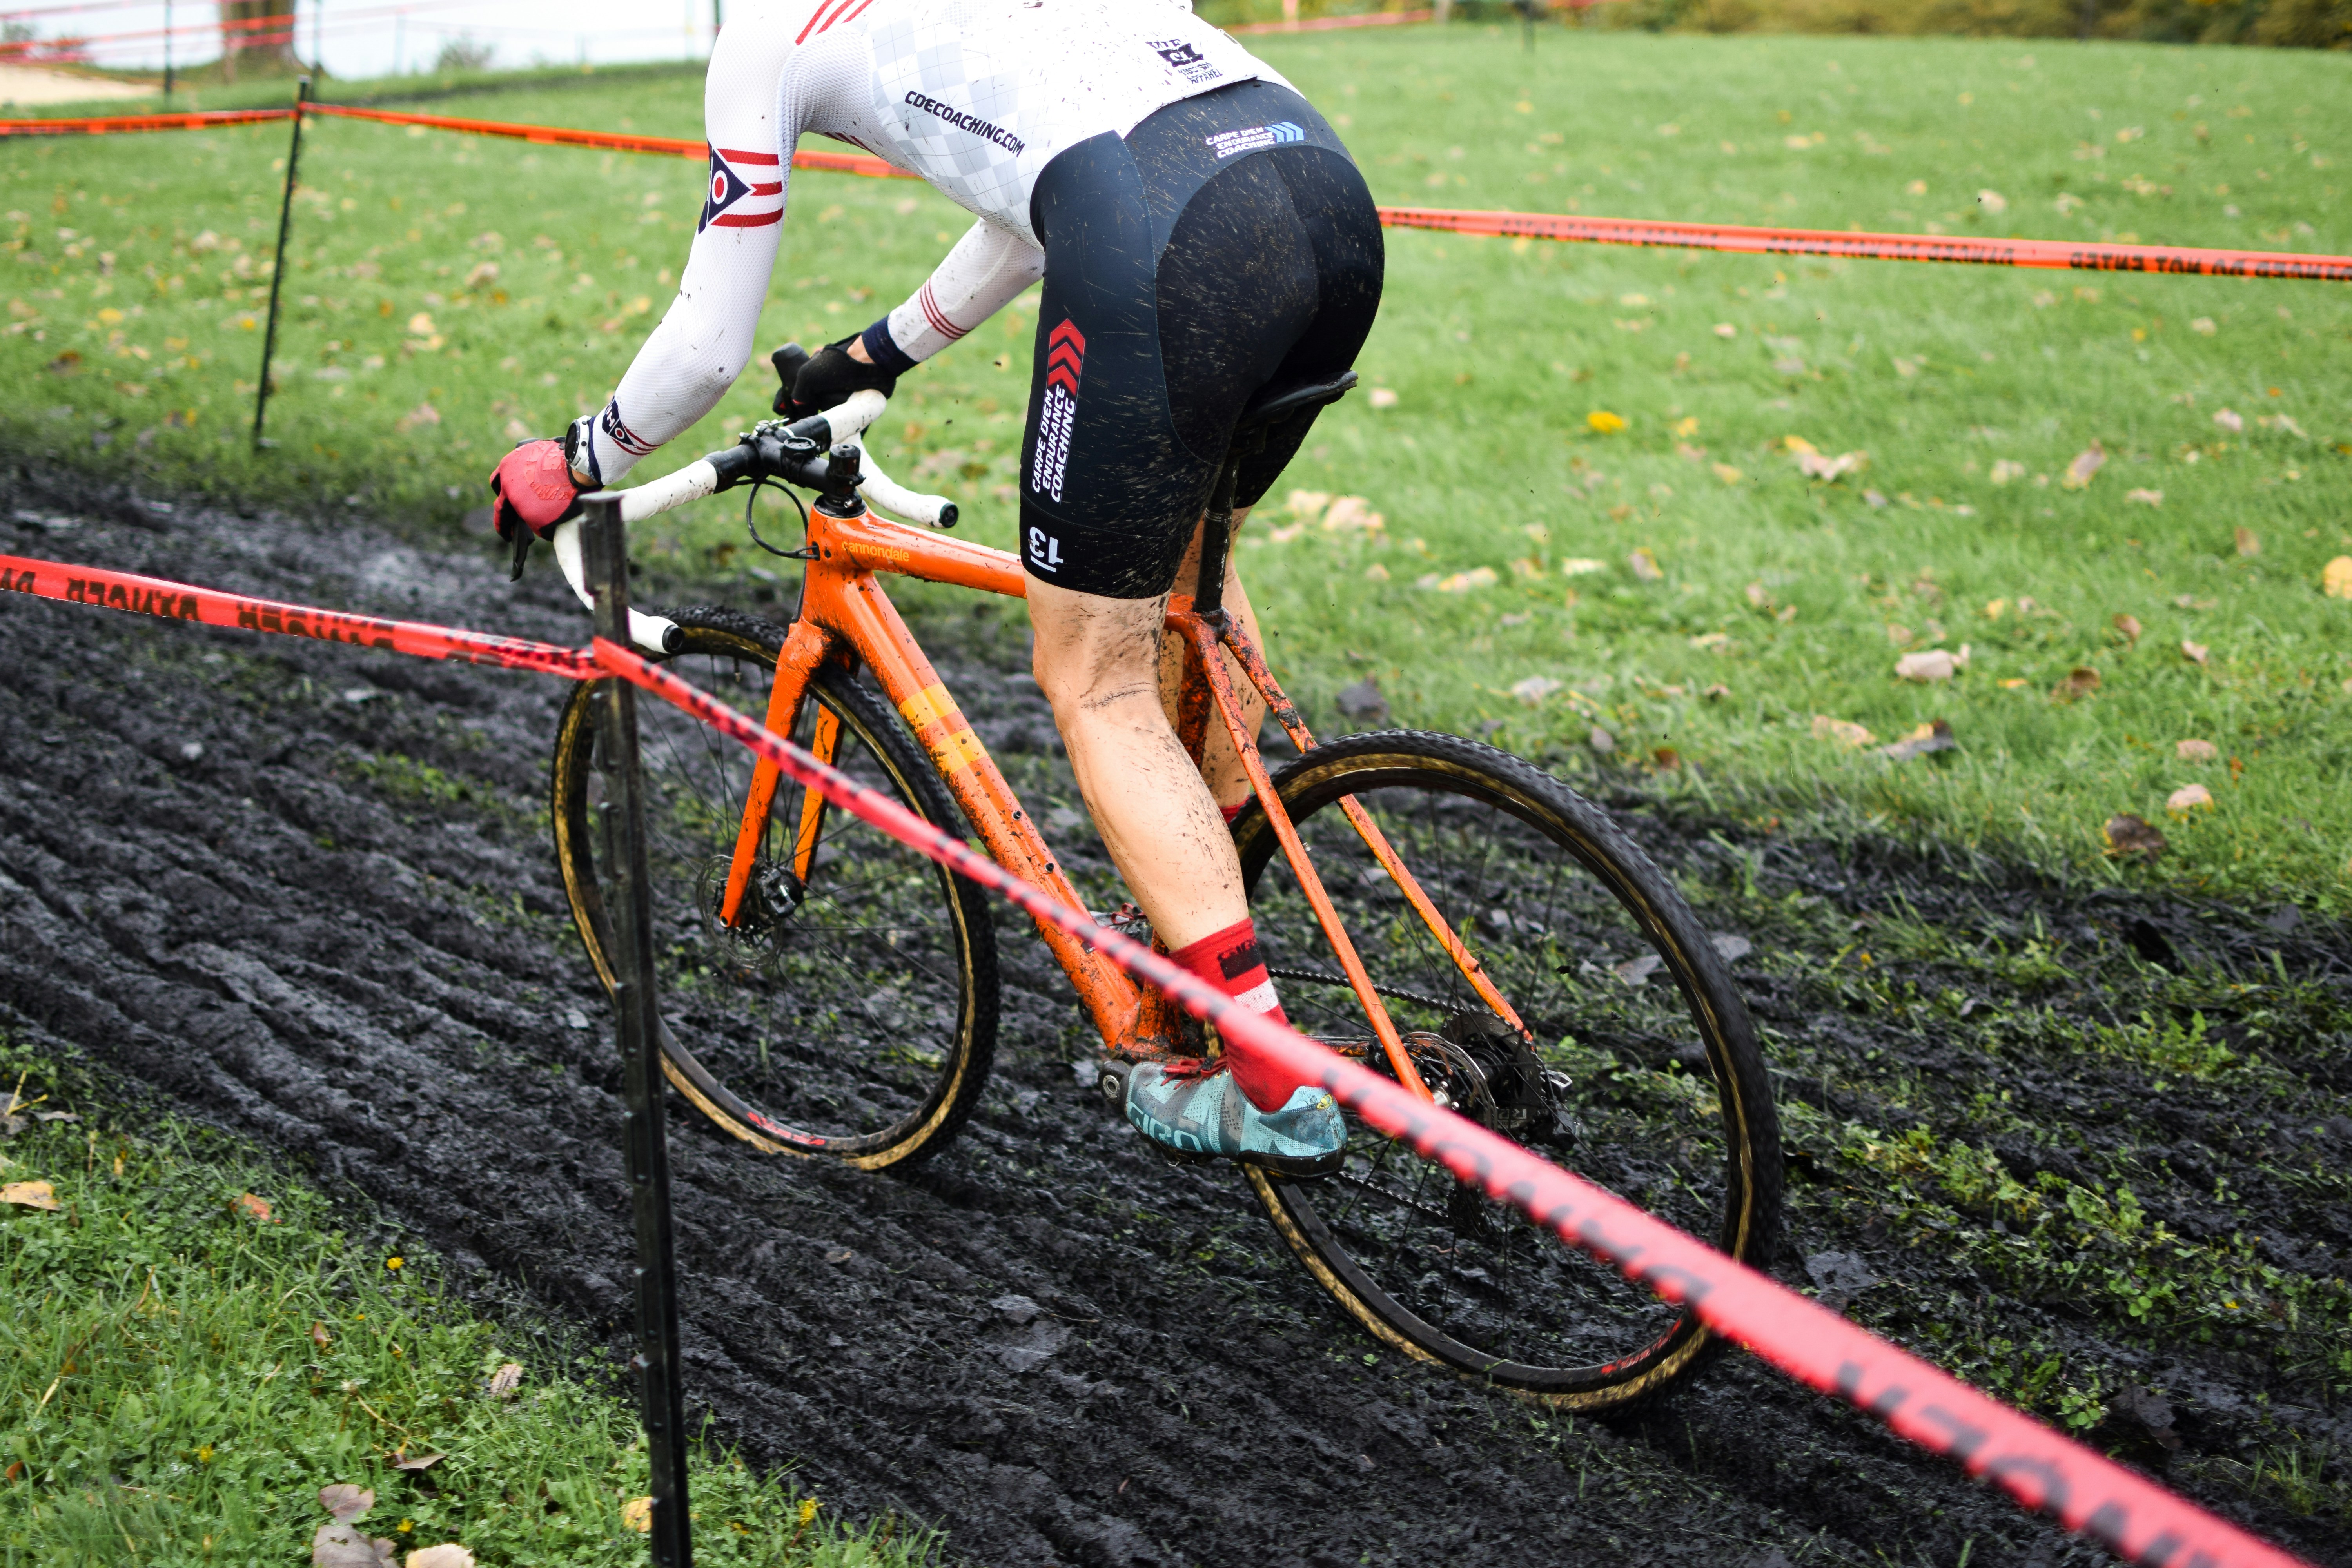 2021 Heck of the North Cyclocross Race, Cleveland, OH